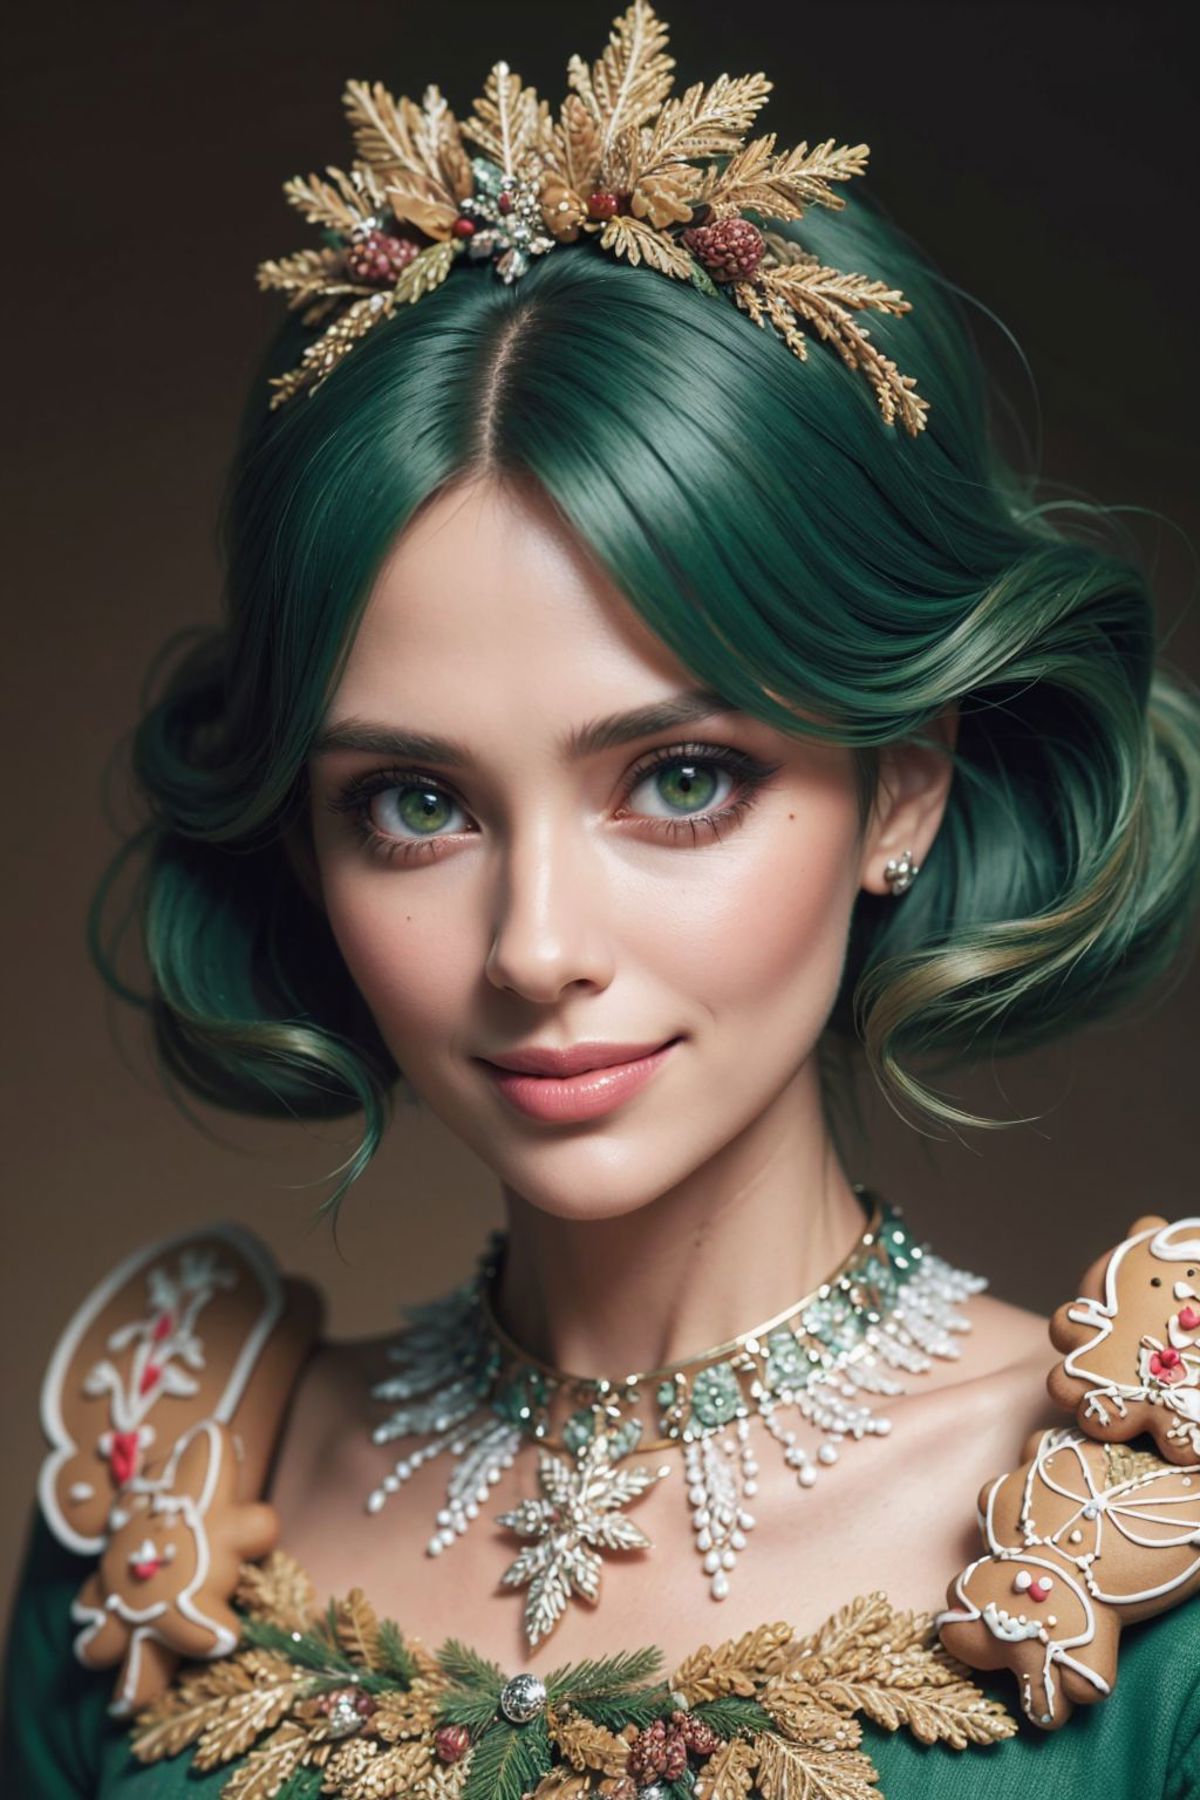 Green-haired woman wearing gold and white jewelry and a crown, smiling at the camera.